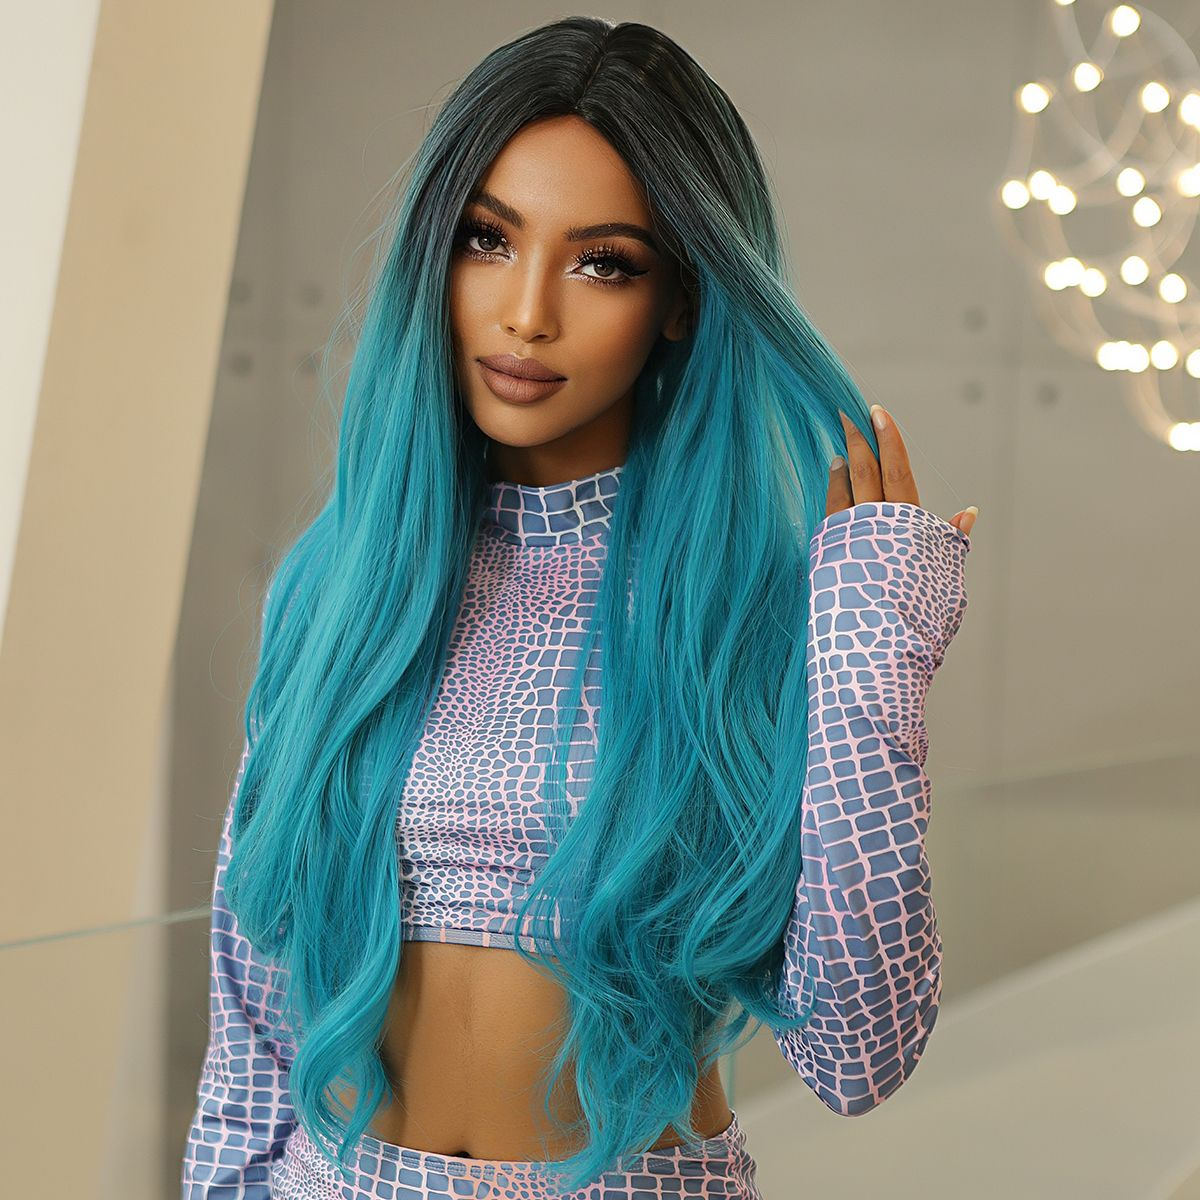 【Gaby 65】🔥BUY 3 WIG PAY 2 WIG🔥 black Ombre green Wigs Long Curly Wigs Middle Part Blonde Highlights Hair Wigs for Women WL1043-1